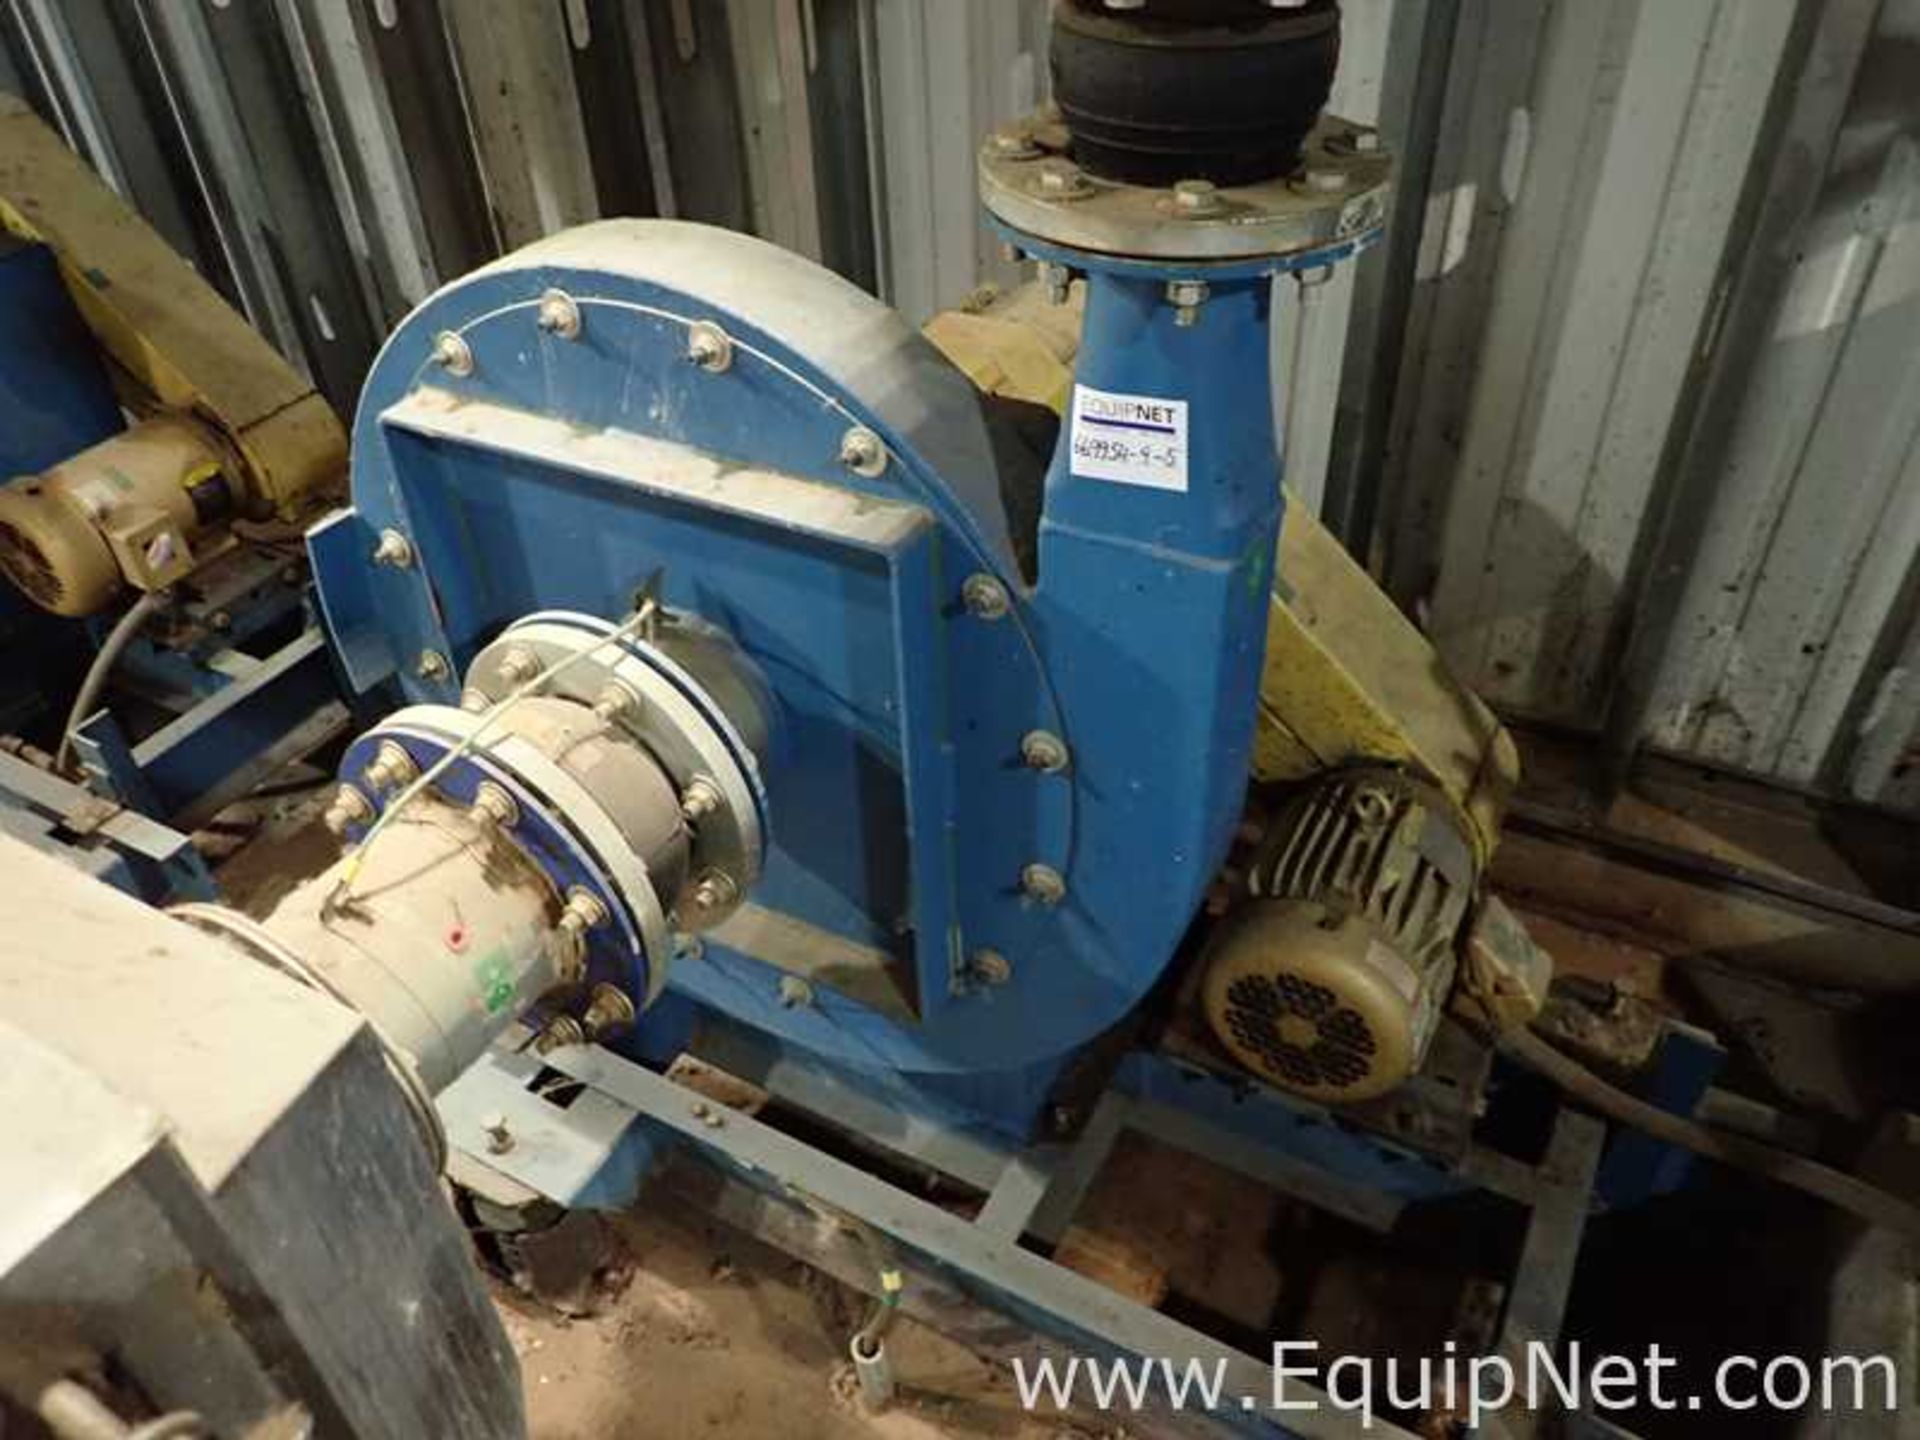 Donaldson Torit DFT 2-4 Dust Collector System - Image 9 of 11